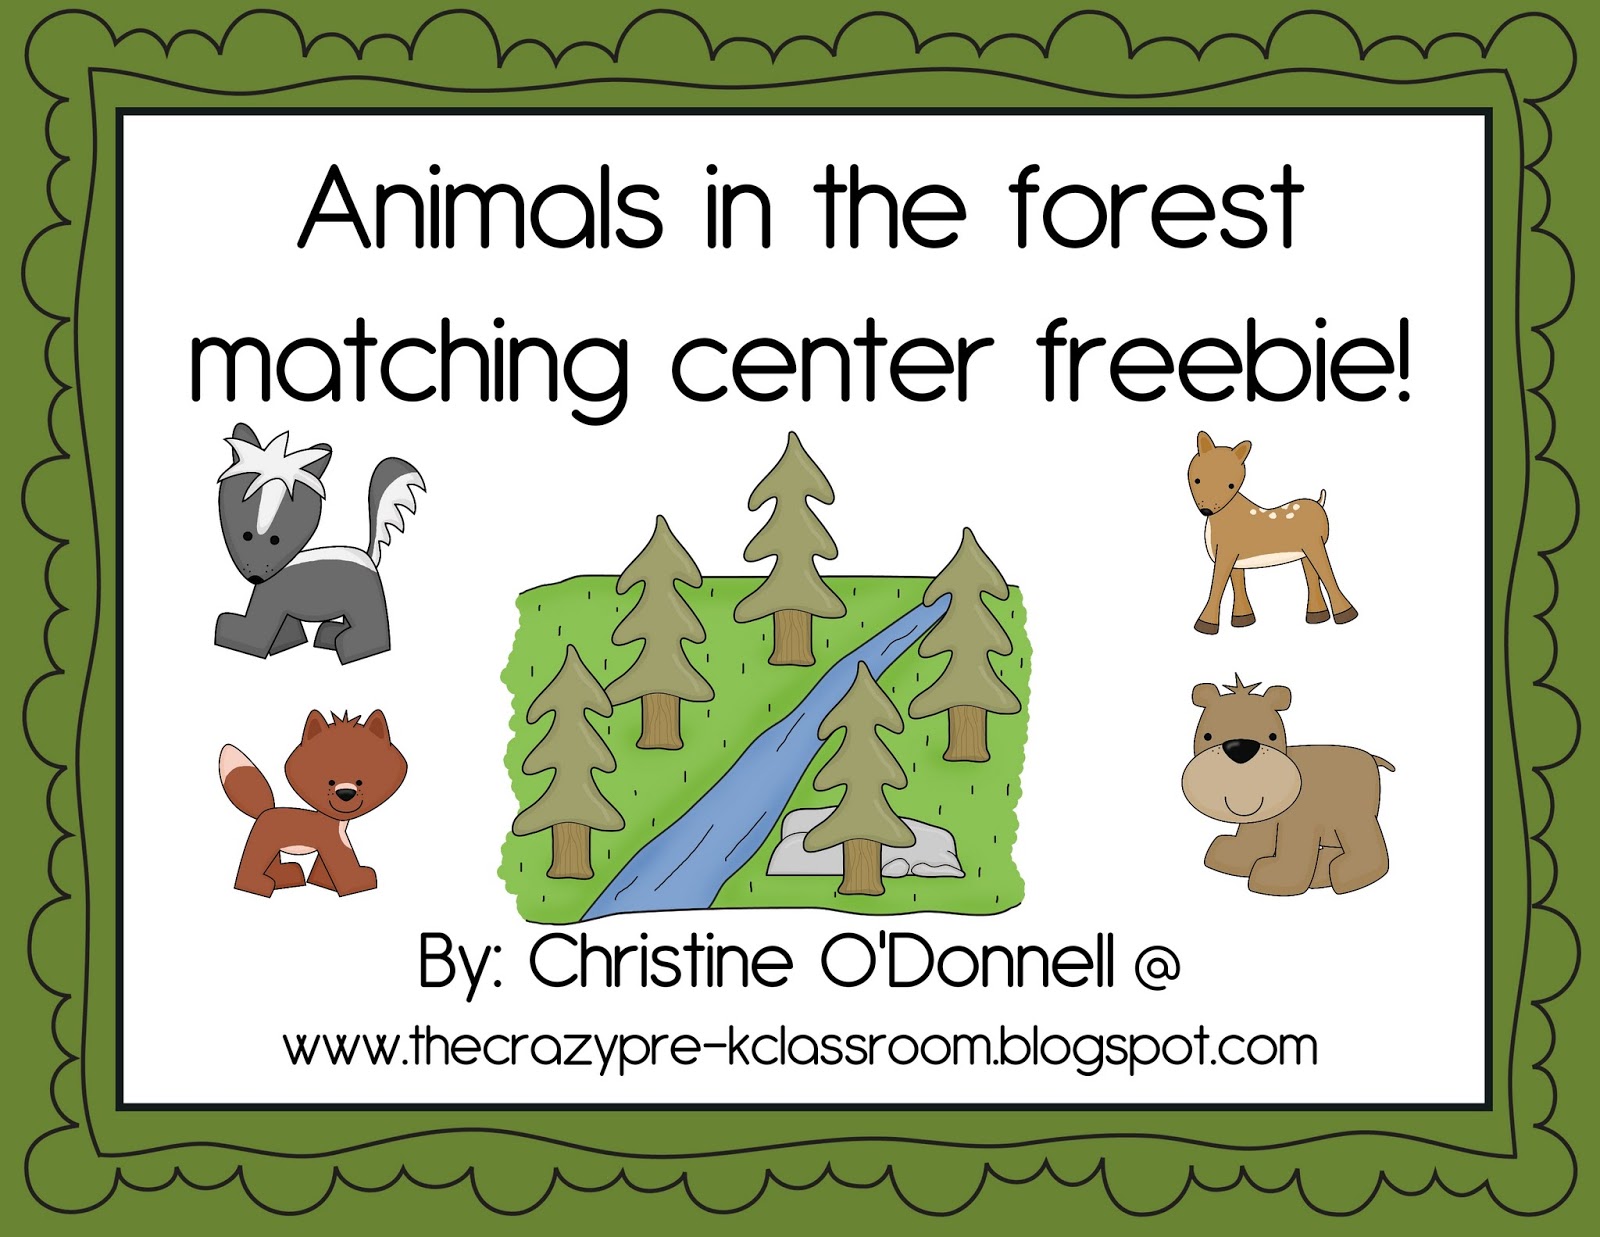 Animal and habitat teaching ideas for pre-k and a freebie!